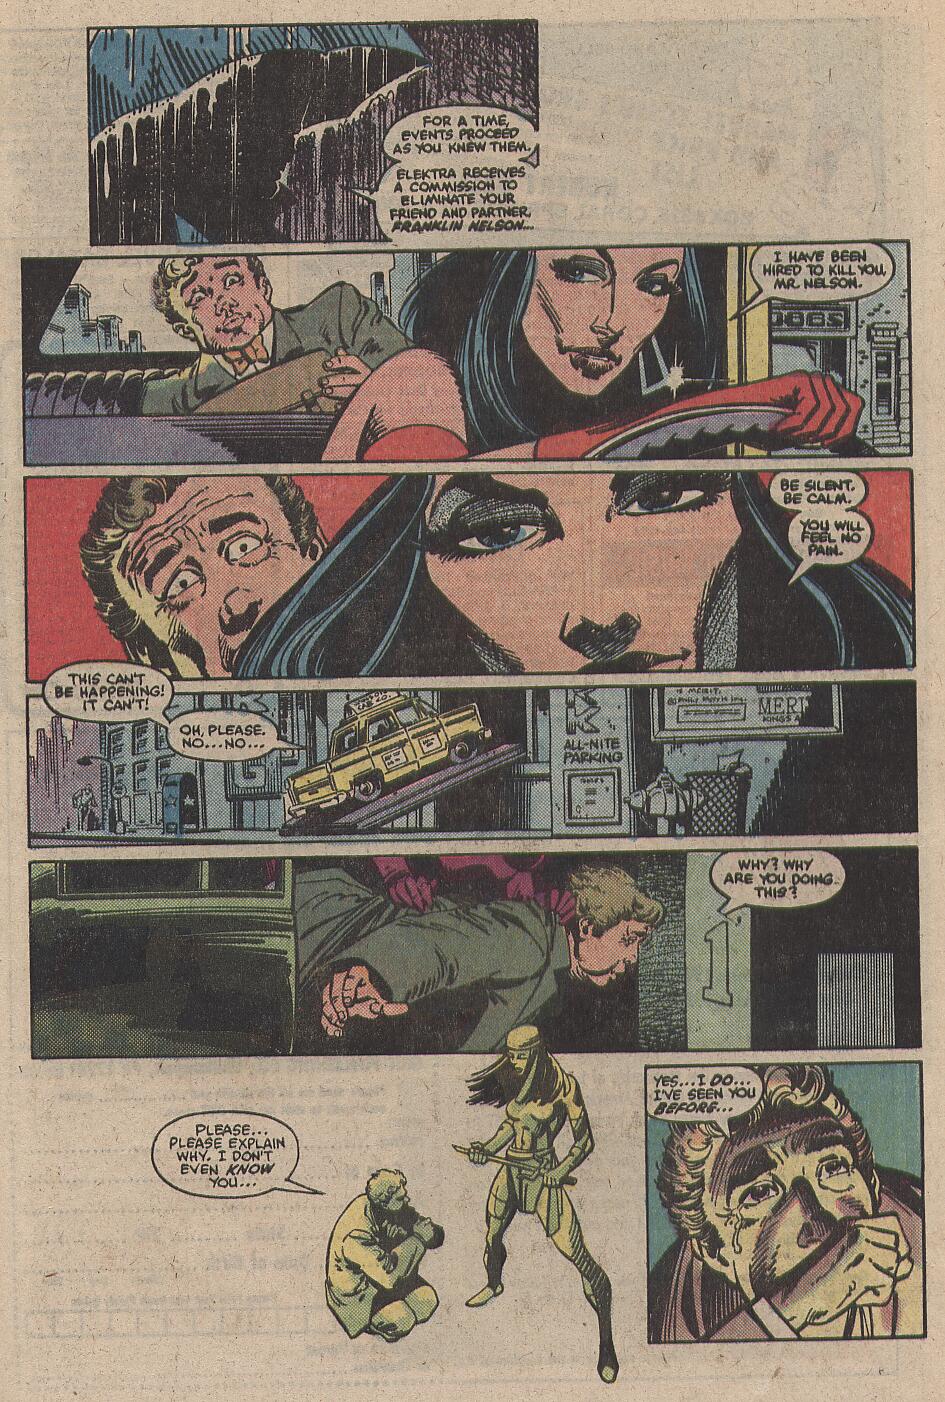 What If? (1977) issue 35 - Elektra had lived - Page 4